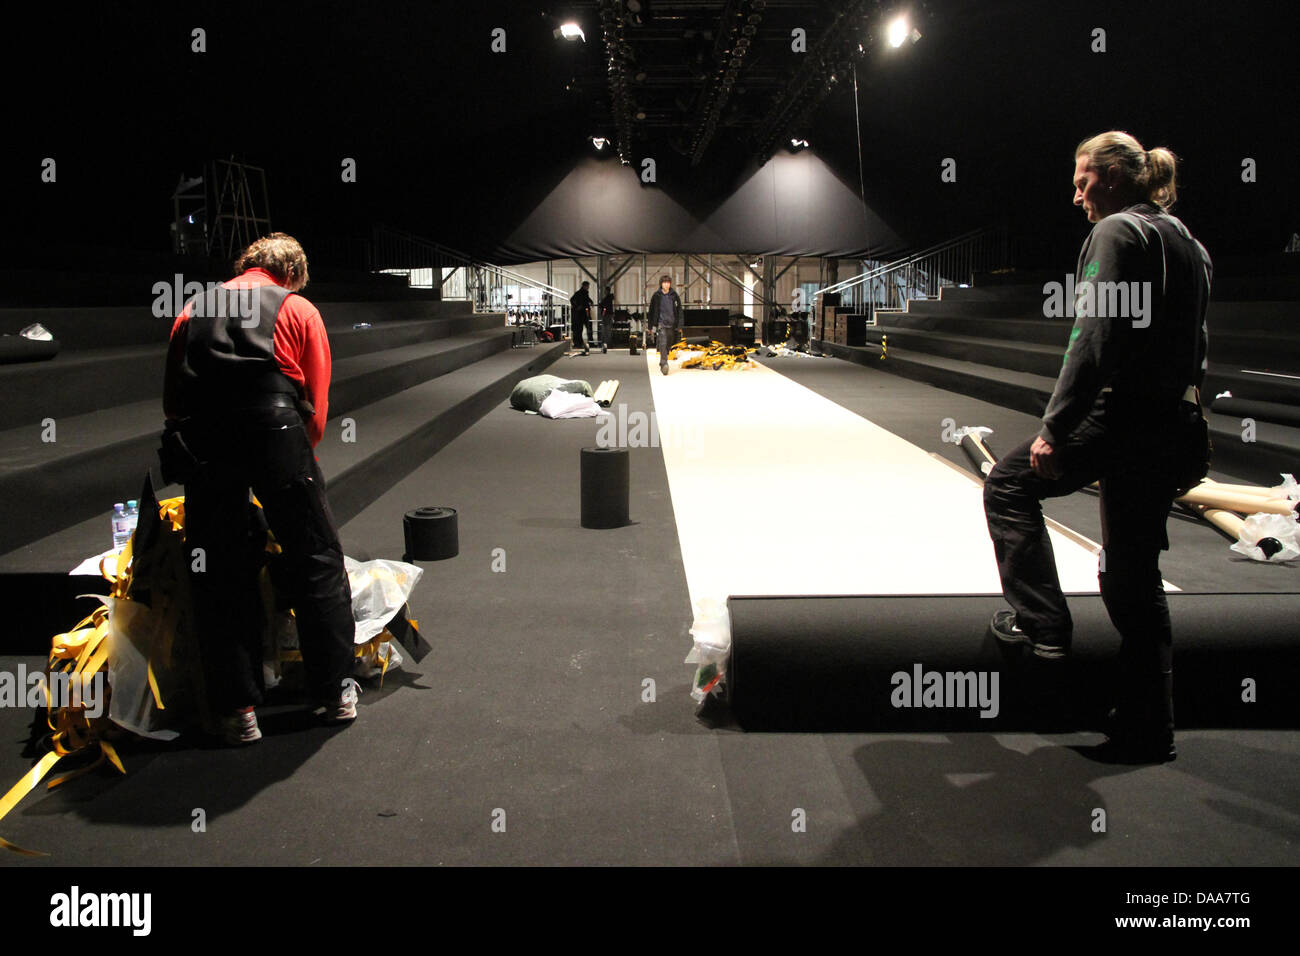 Craftspersons roll out a black carpet inside a tent for the Fashionweek 2011 at the Bebelplatz in Berlin, Germany, 13 January 2011. The Fashionweek, presenting collections of the Autumn and Spring season, takes place from 19-22 January 2011. Photo: Marc Tirl Stock Photo